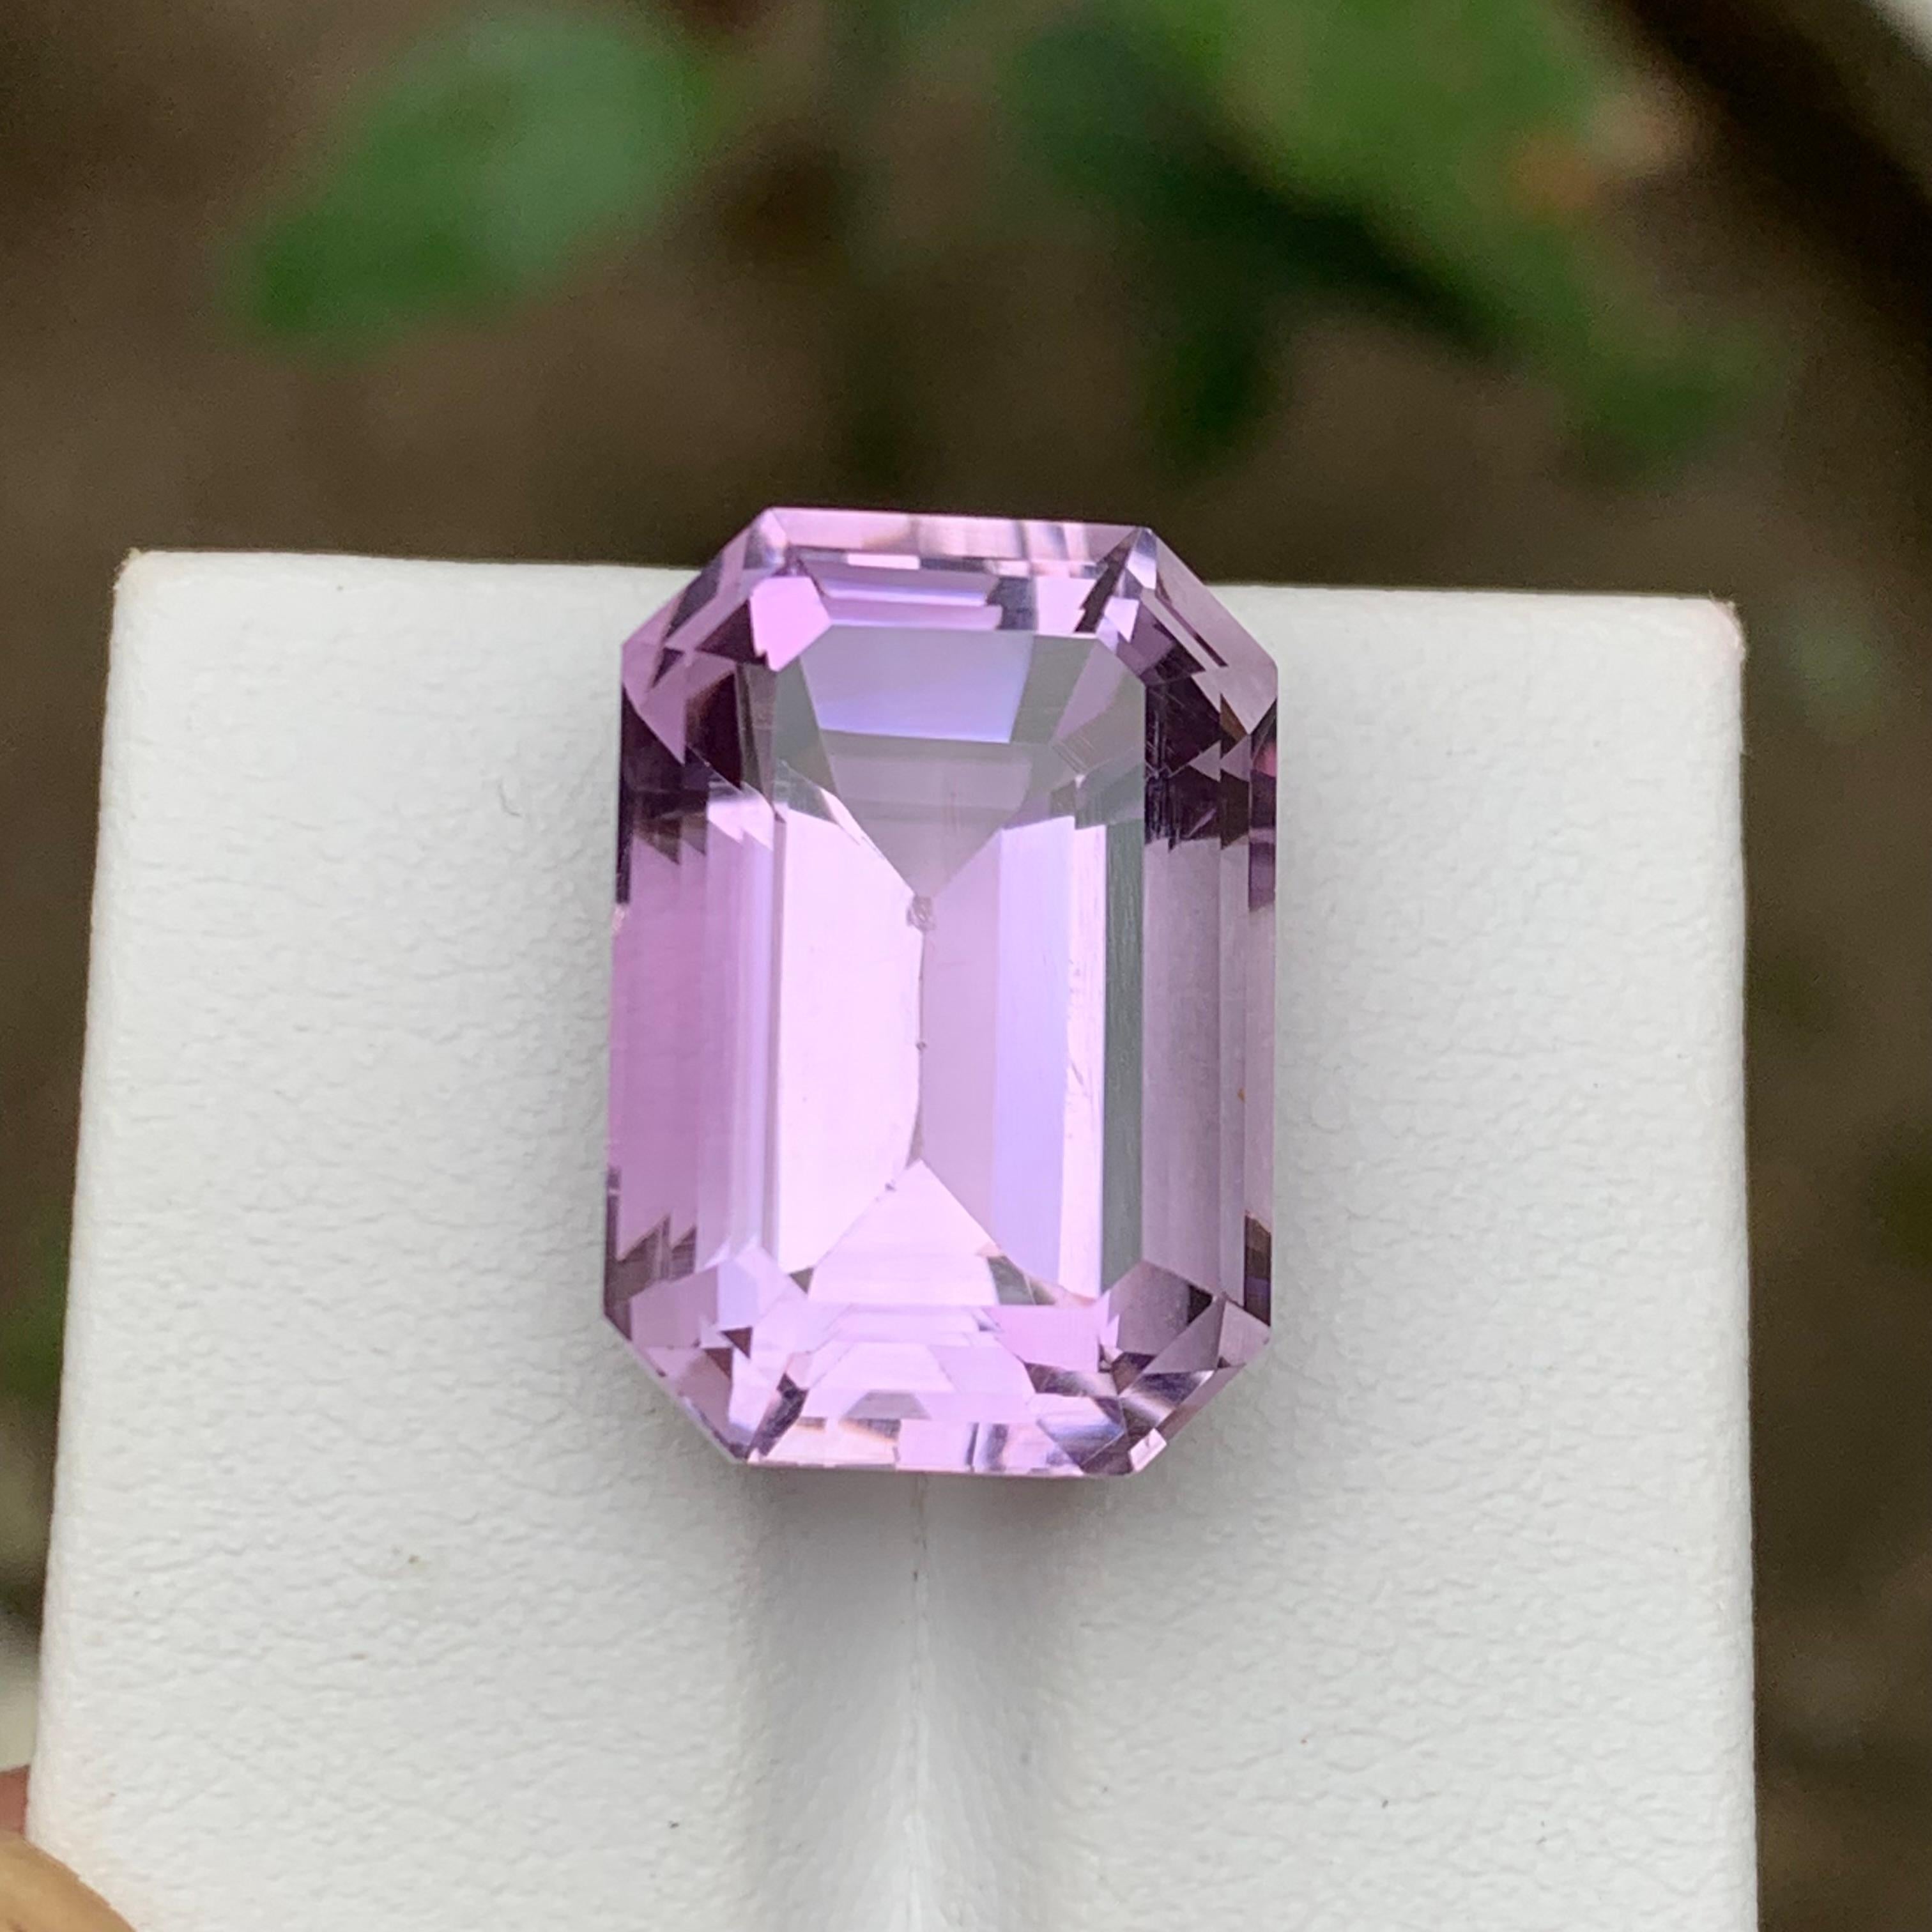 GEMSTONE TYPE: Amethyst 
PIECE(S): 1
WEIGHT: 22.05 Carats
SHAPE: Step Emerald Cut
SIZE (MM): 19.60 x 13.57 x 11.62
COLOR: Light Purple
CLARITY: Eye Clean
TREATMENT: None
ORIGIN: Africa
CERTIFICATE: On demand
(if you require a certificate, kindly